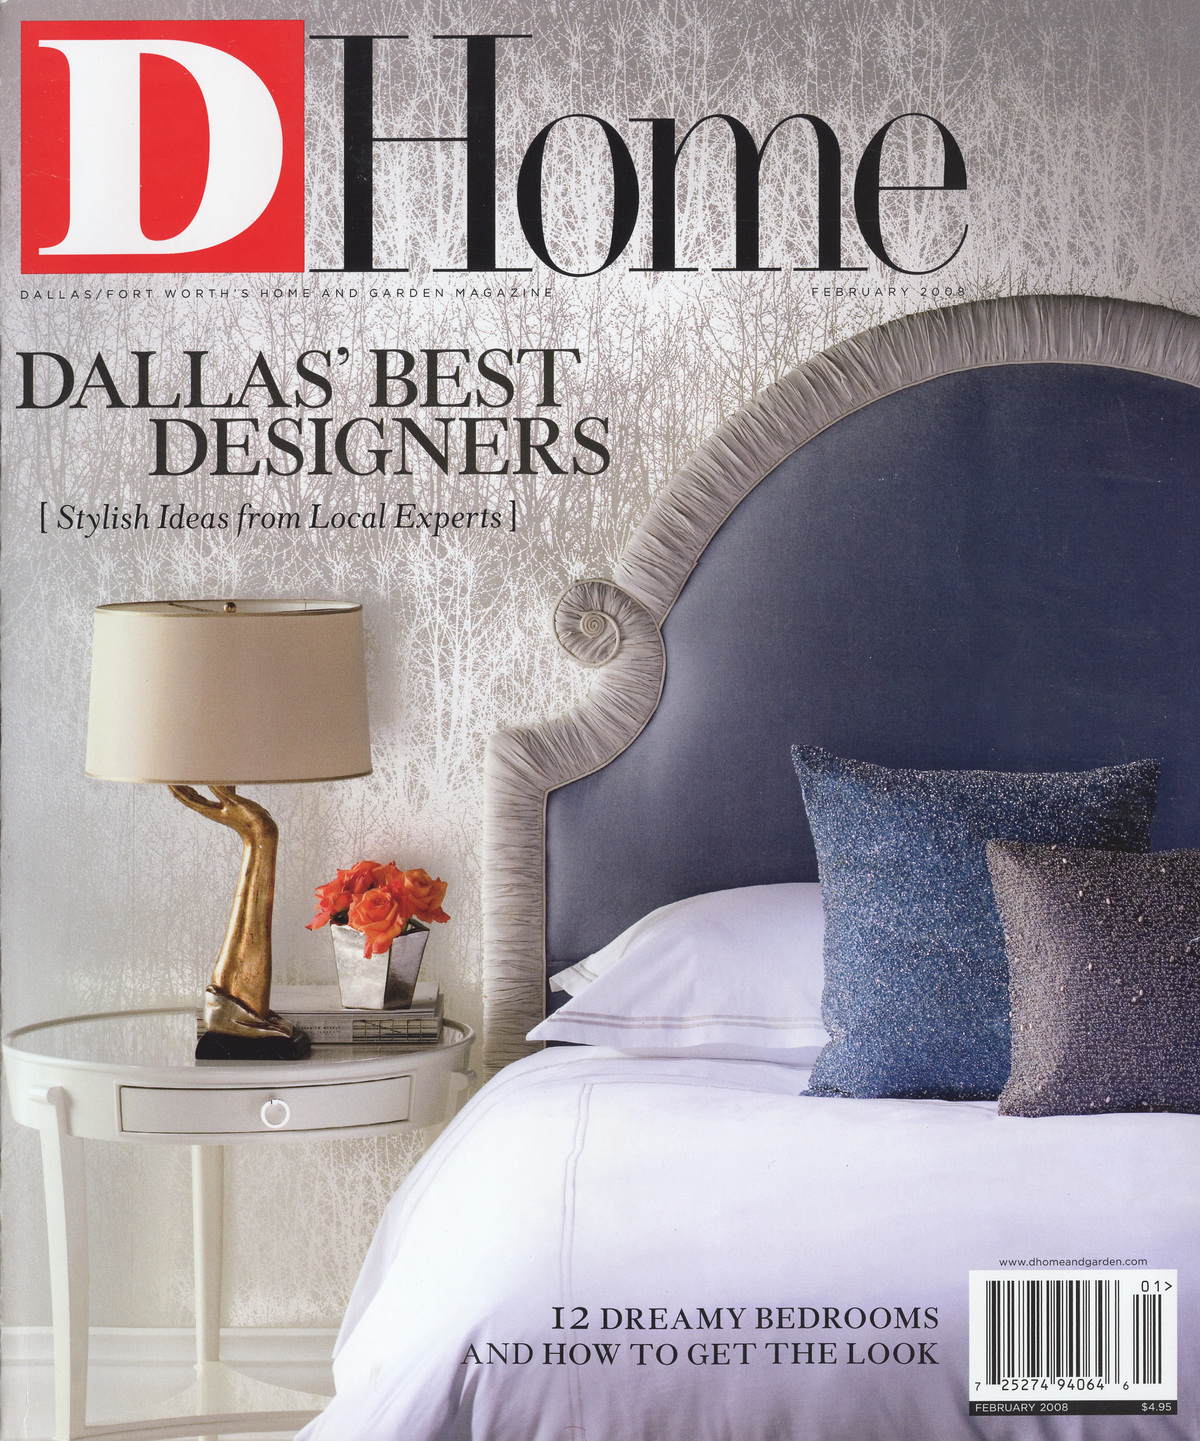 770-dhome-2-2008cover.jpg